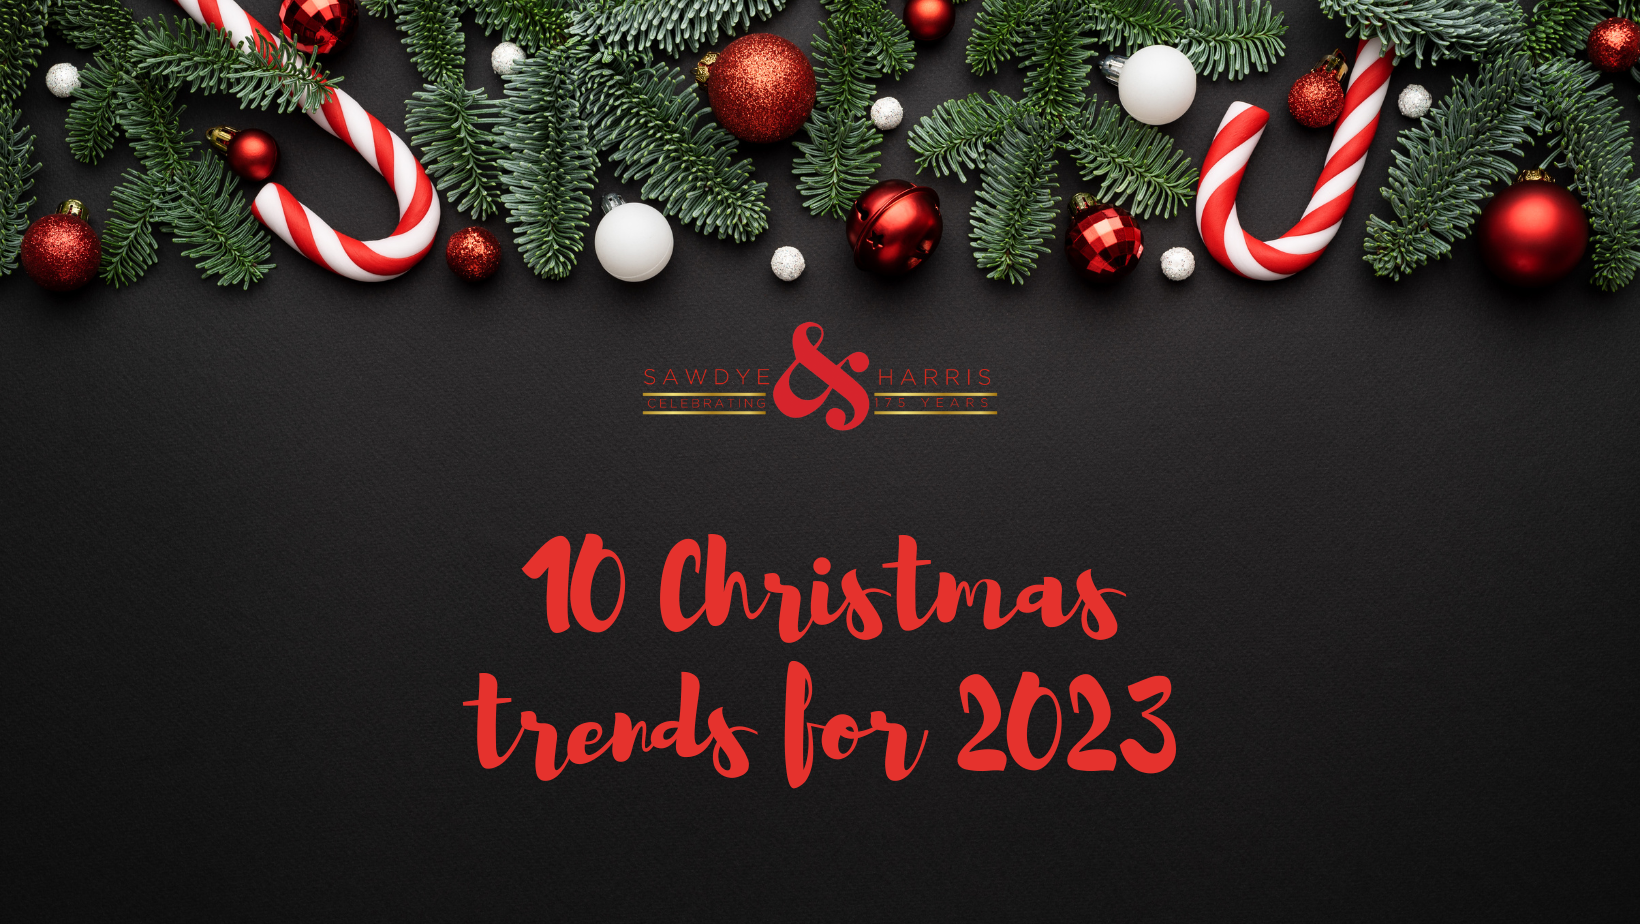 10 Christmas trends for 2023